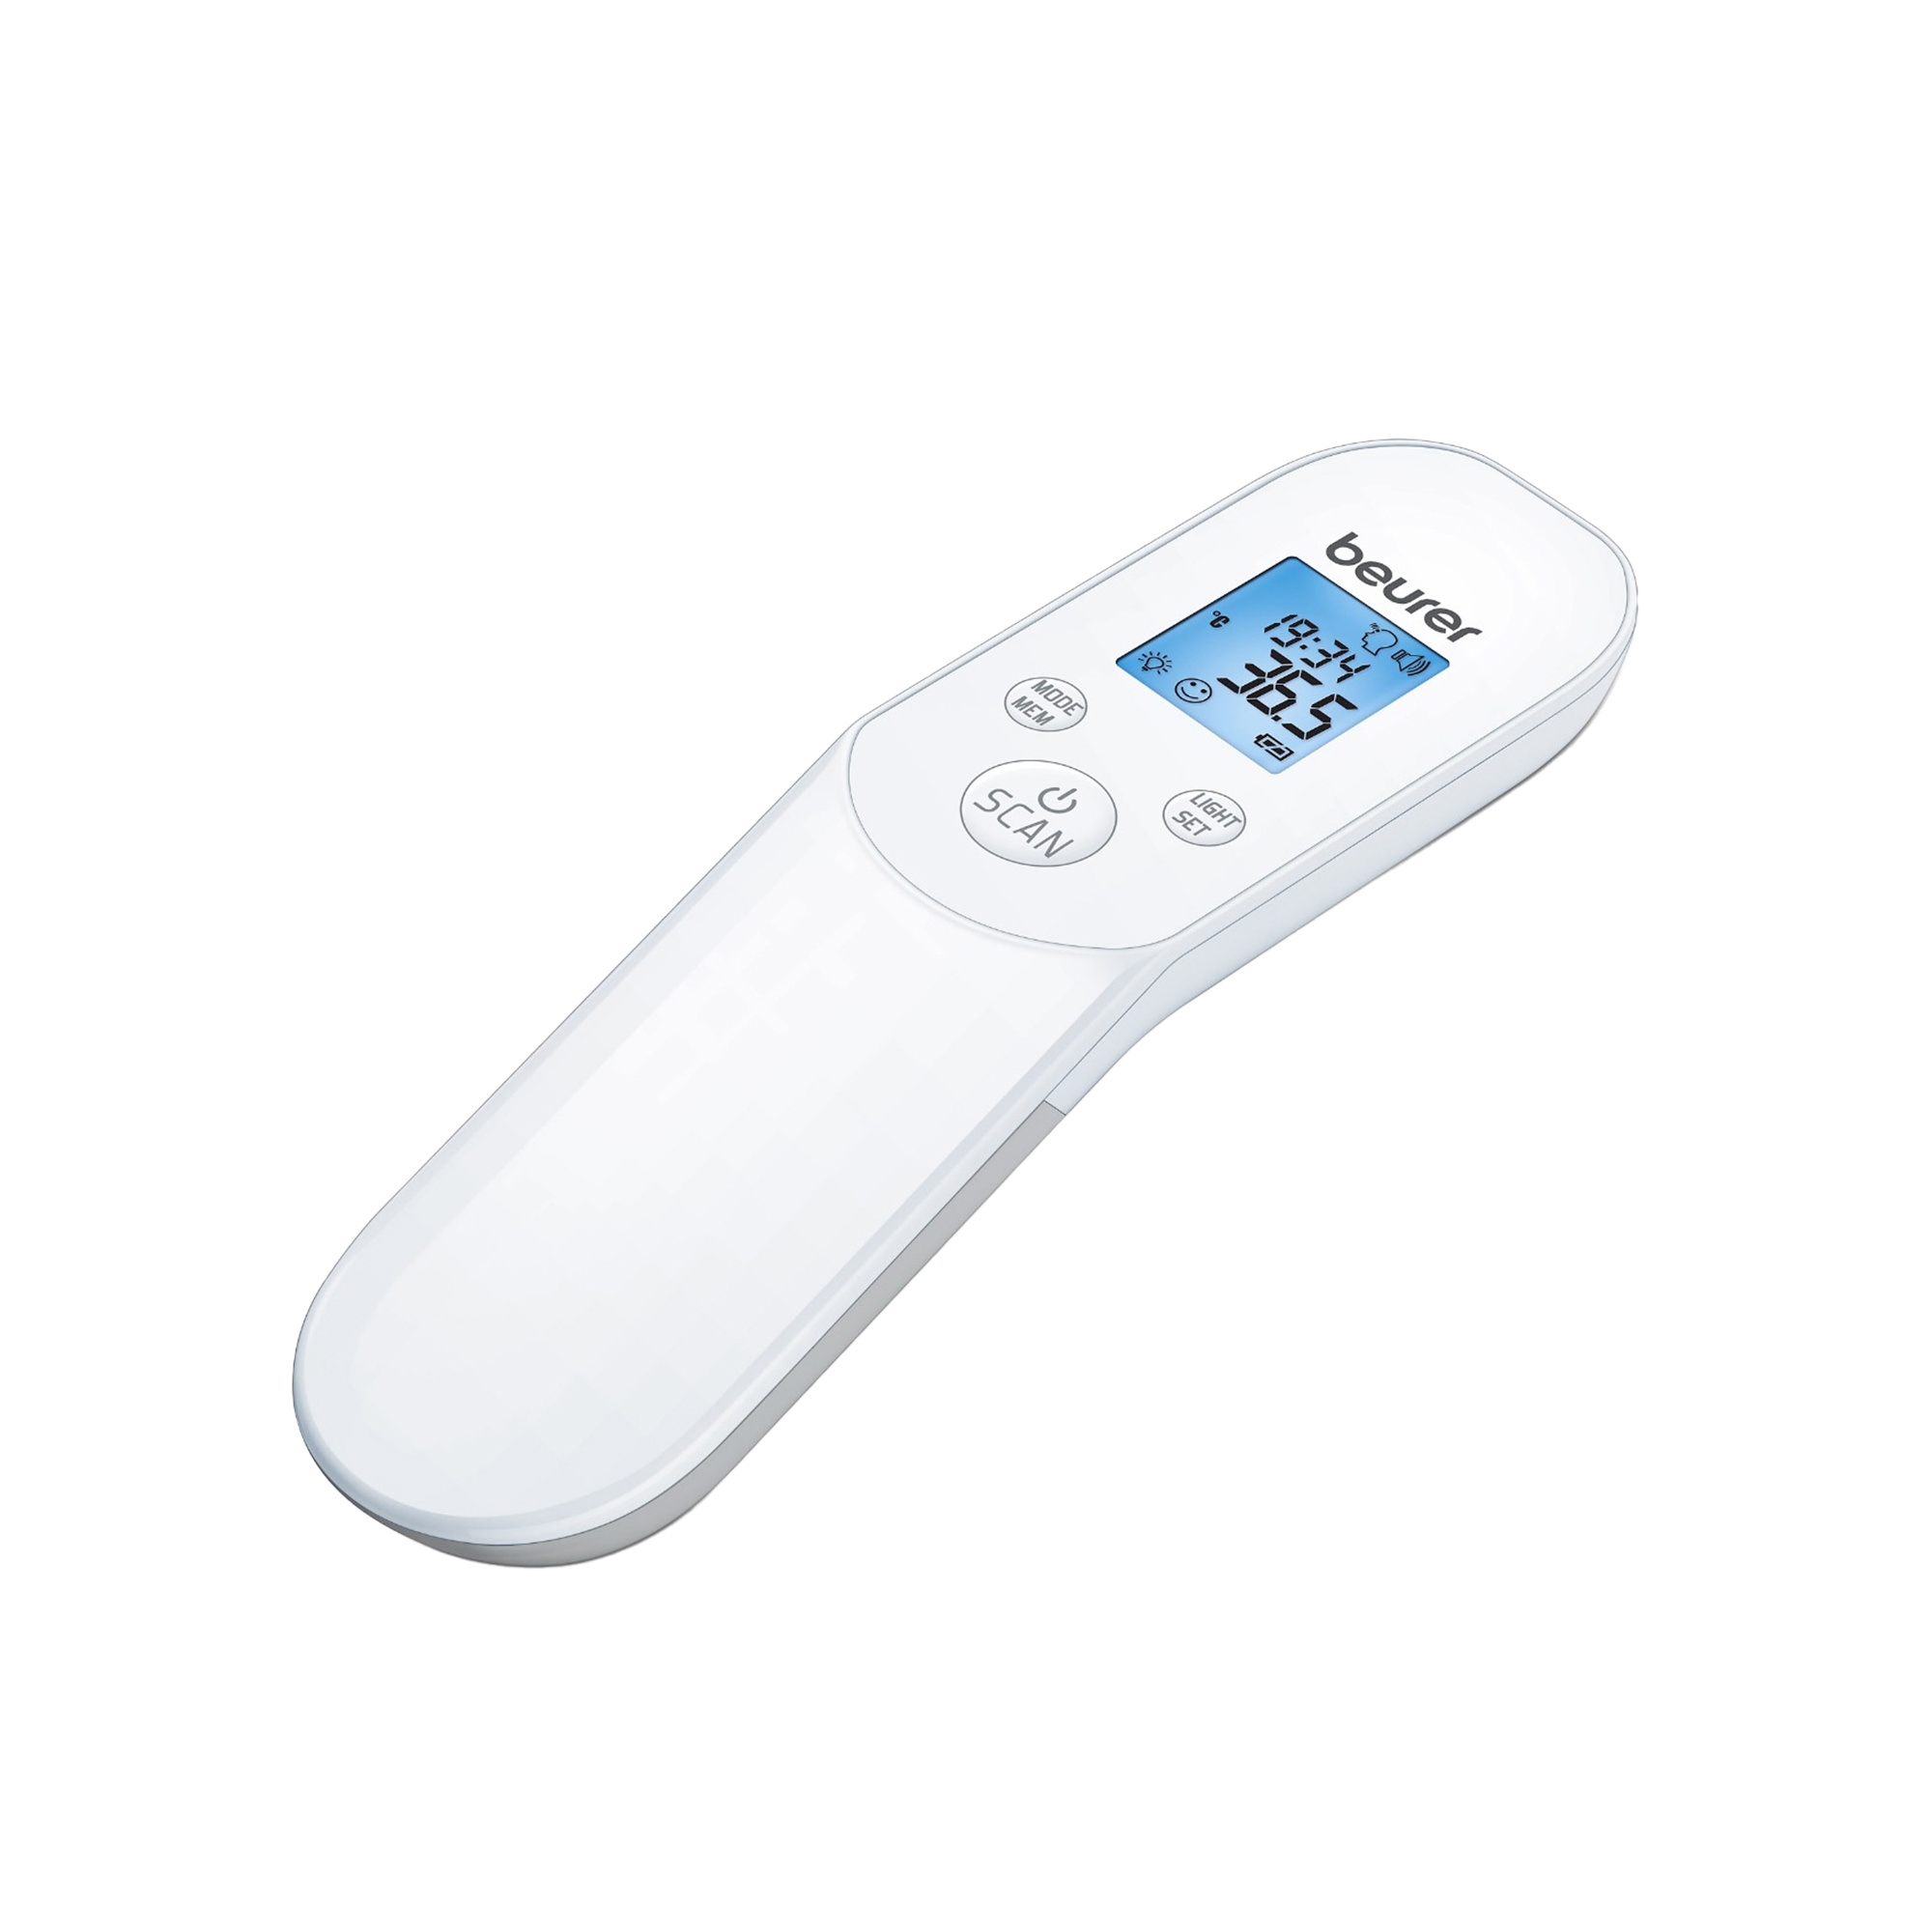 Beurer Infrared Non Contact Digital Thermometer Image 1